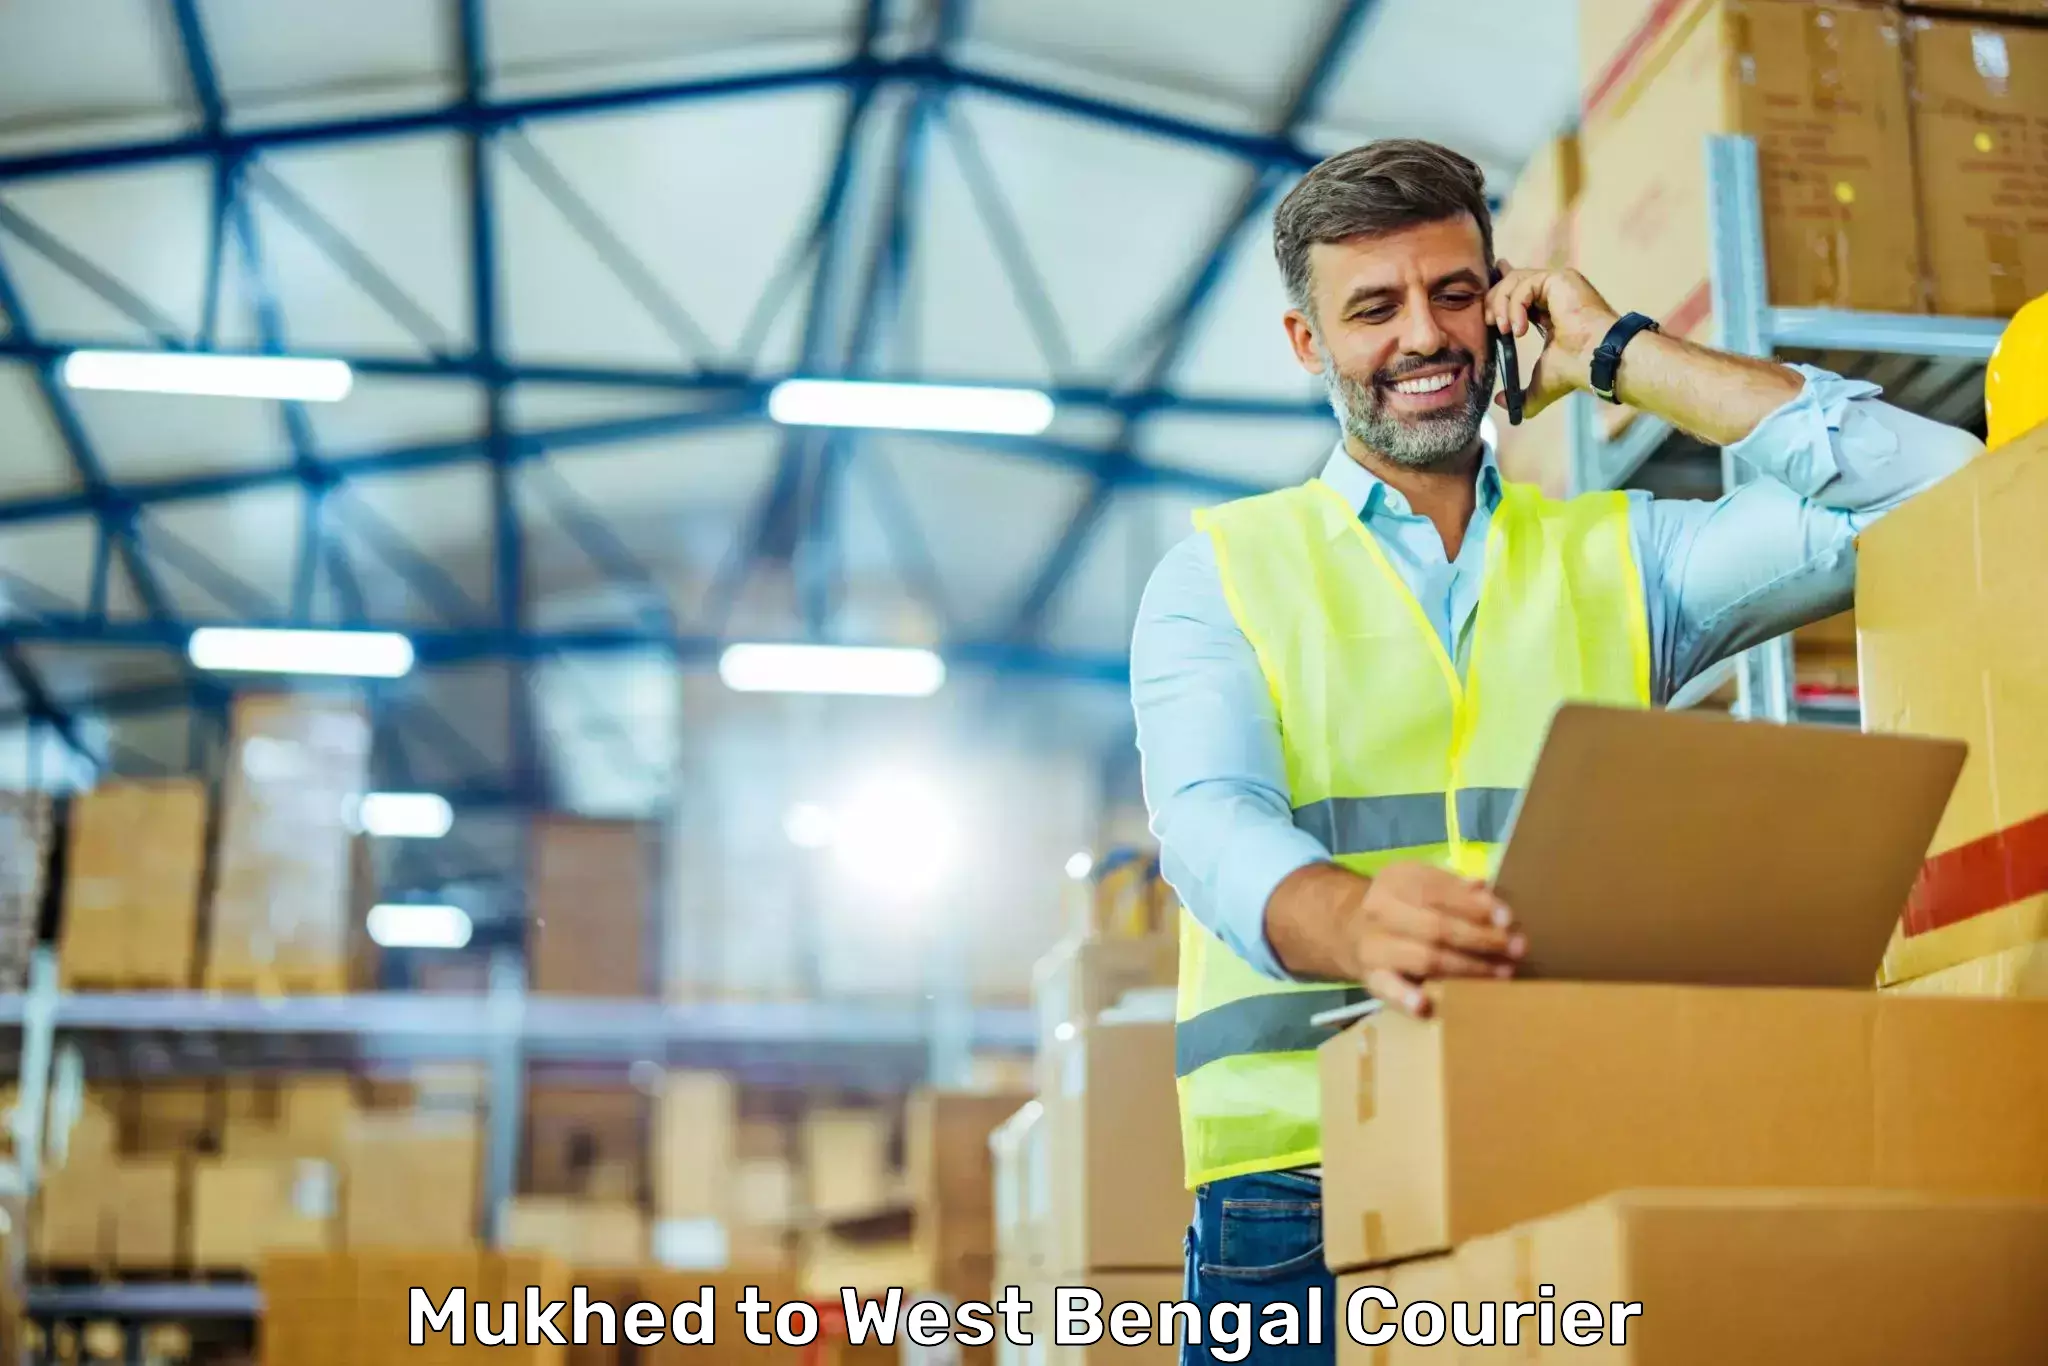 State-of-the-art courier technology Mukhed to West Bengal